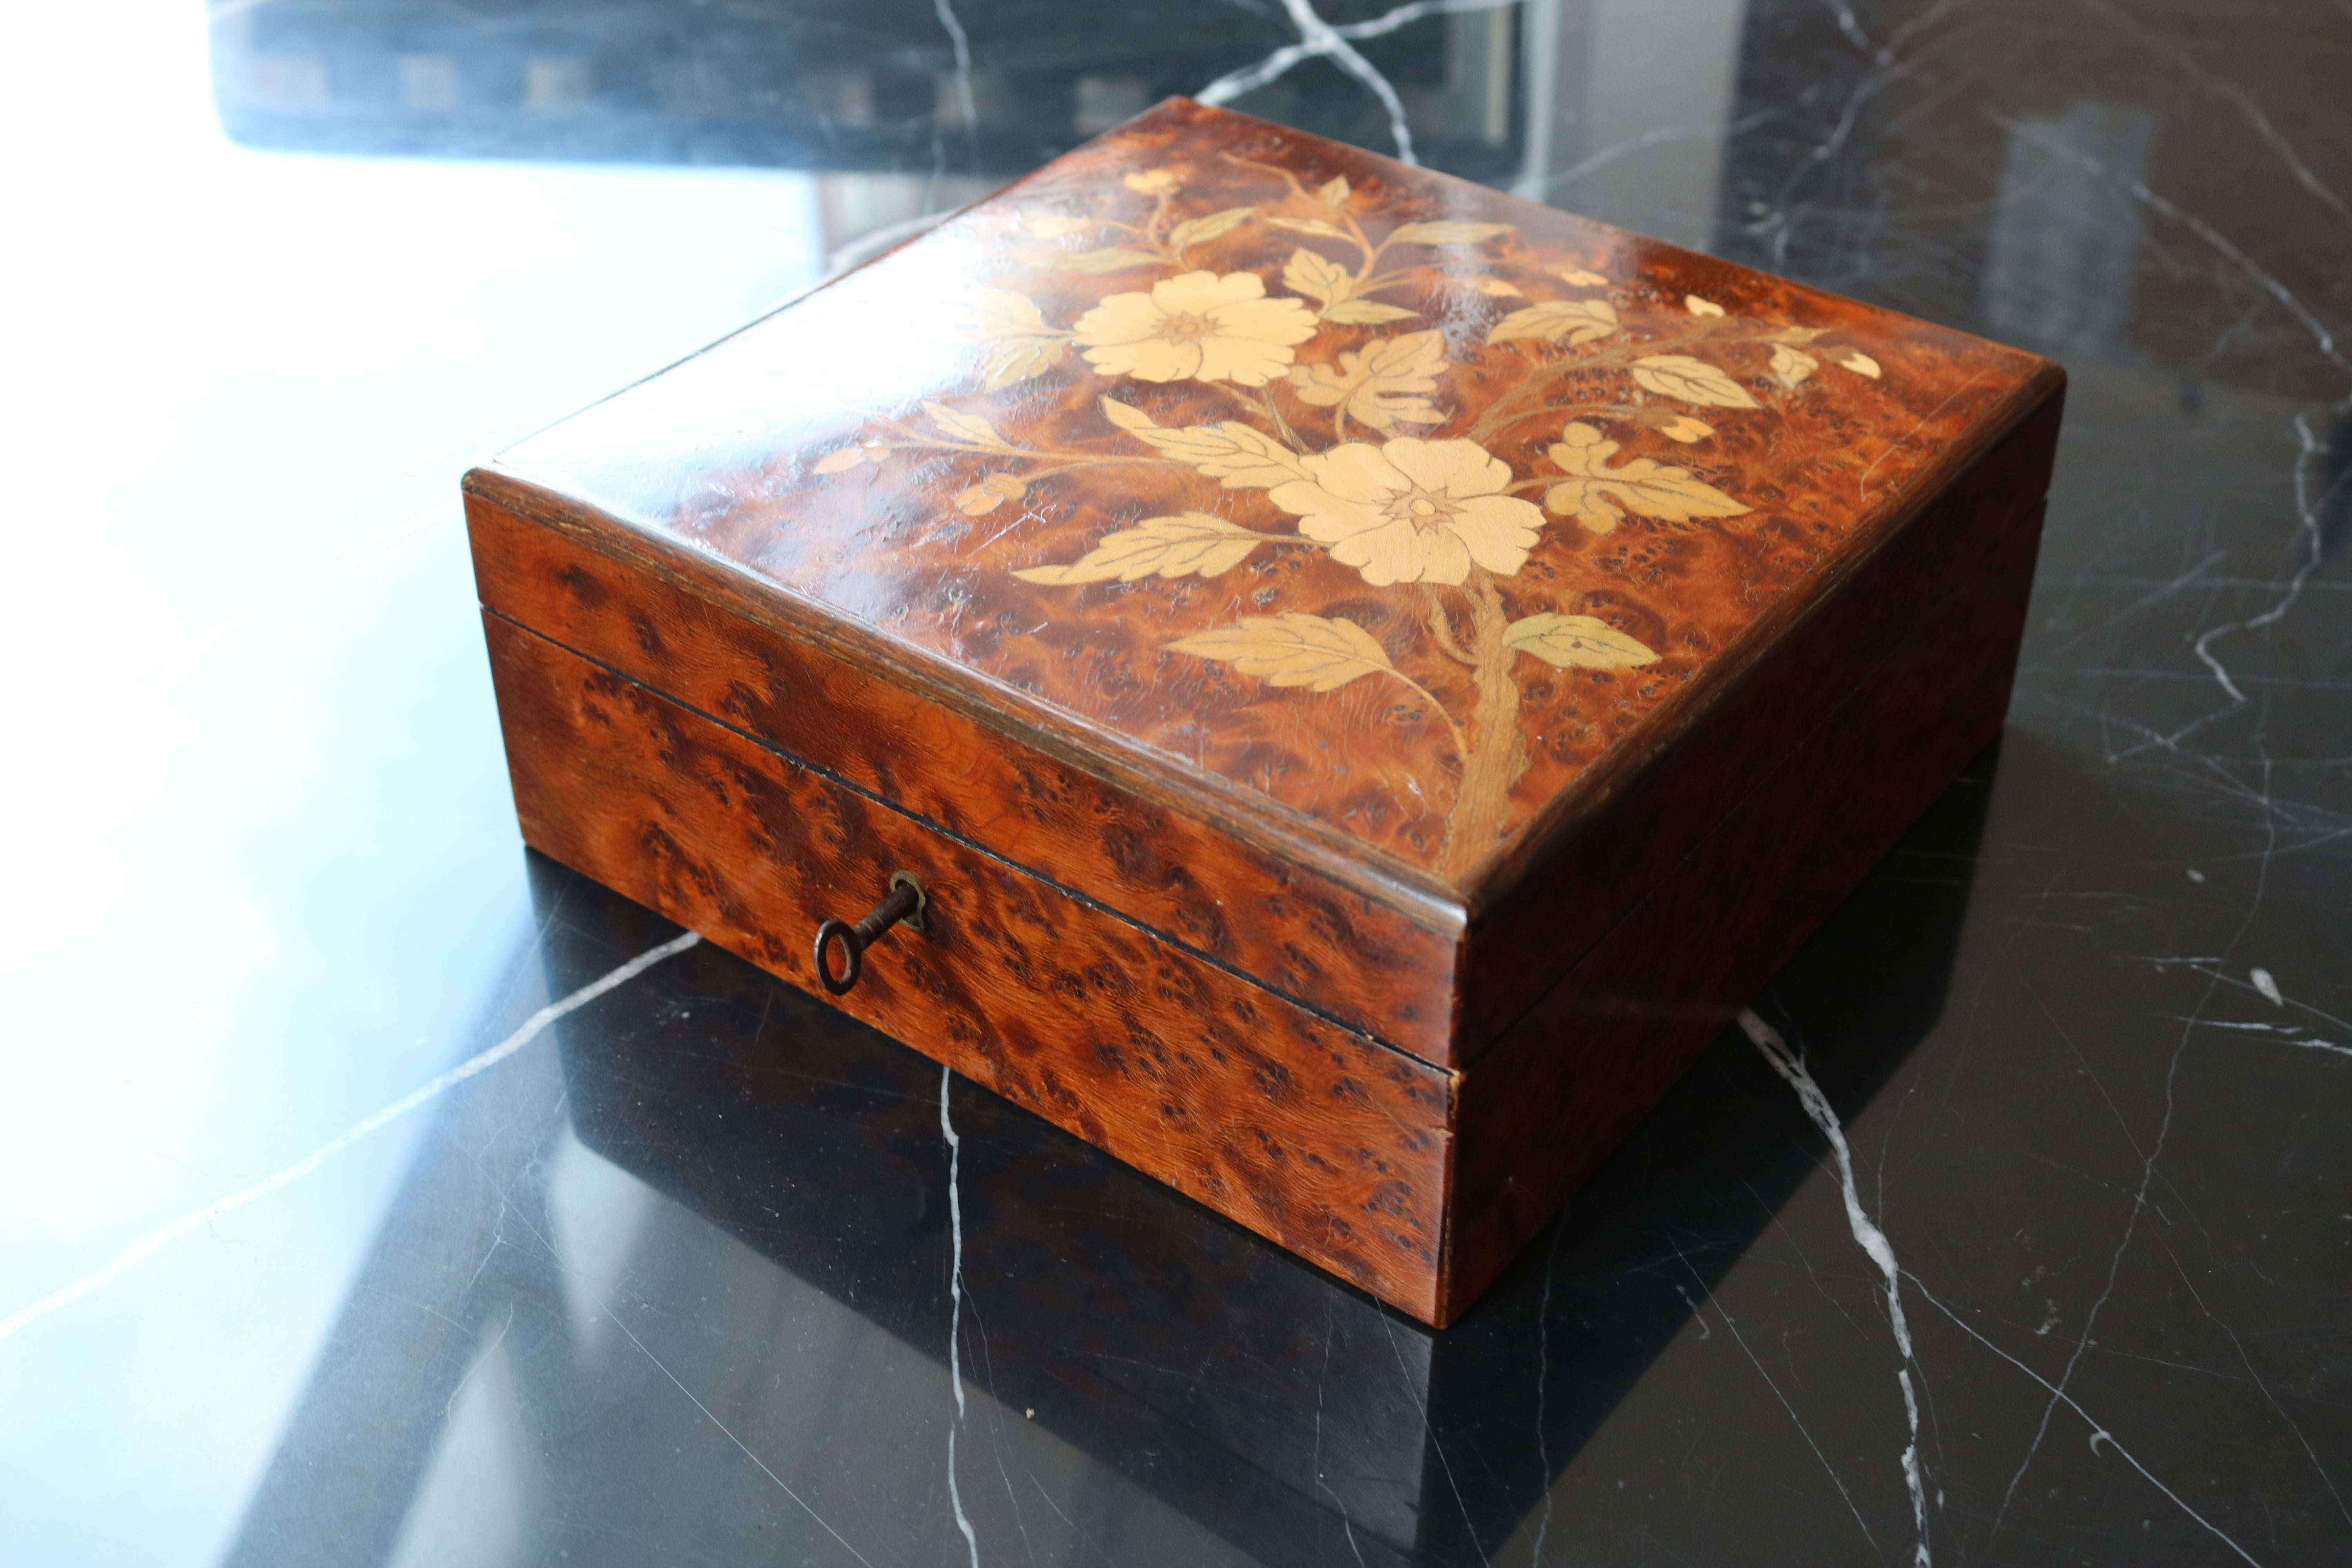 Romantic Antique French Art Nouveau Jewelry Box in Burl Wood & Floral Inlay 1900 For Sale 11